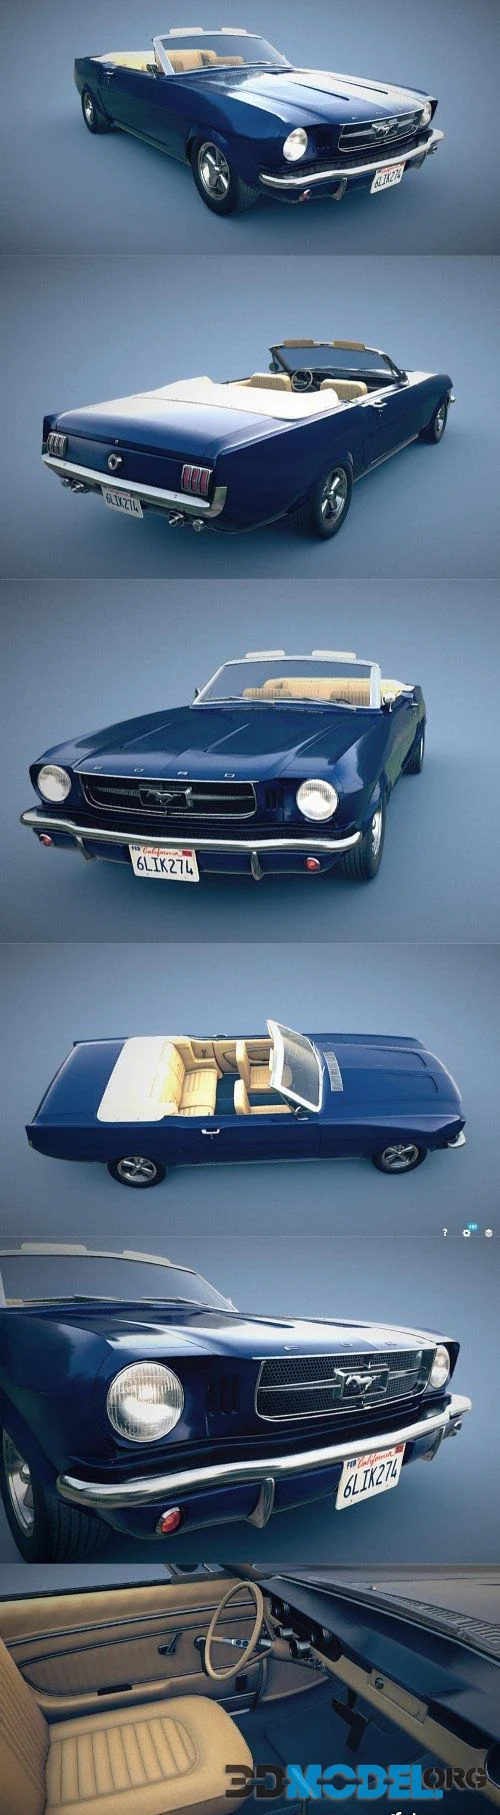 1965 Ford Mustang Convertible (PBR)